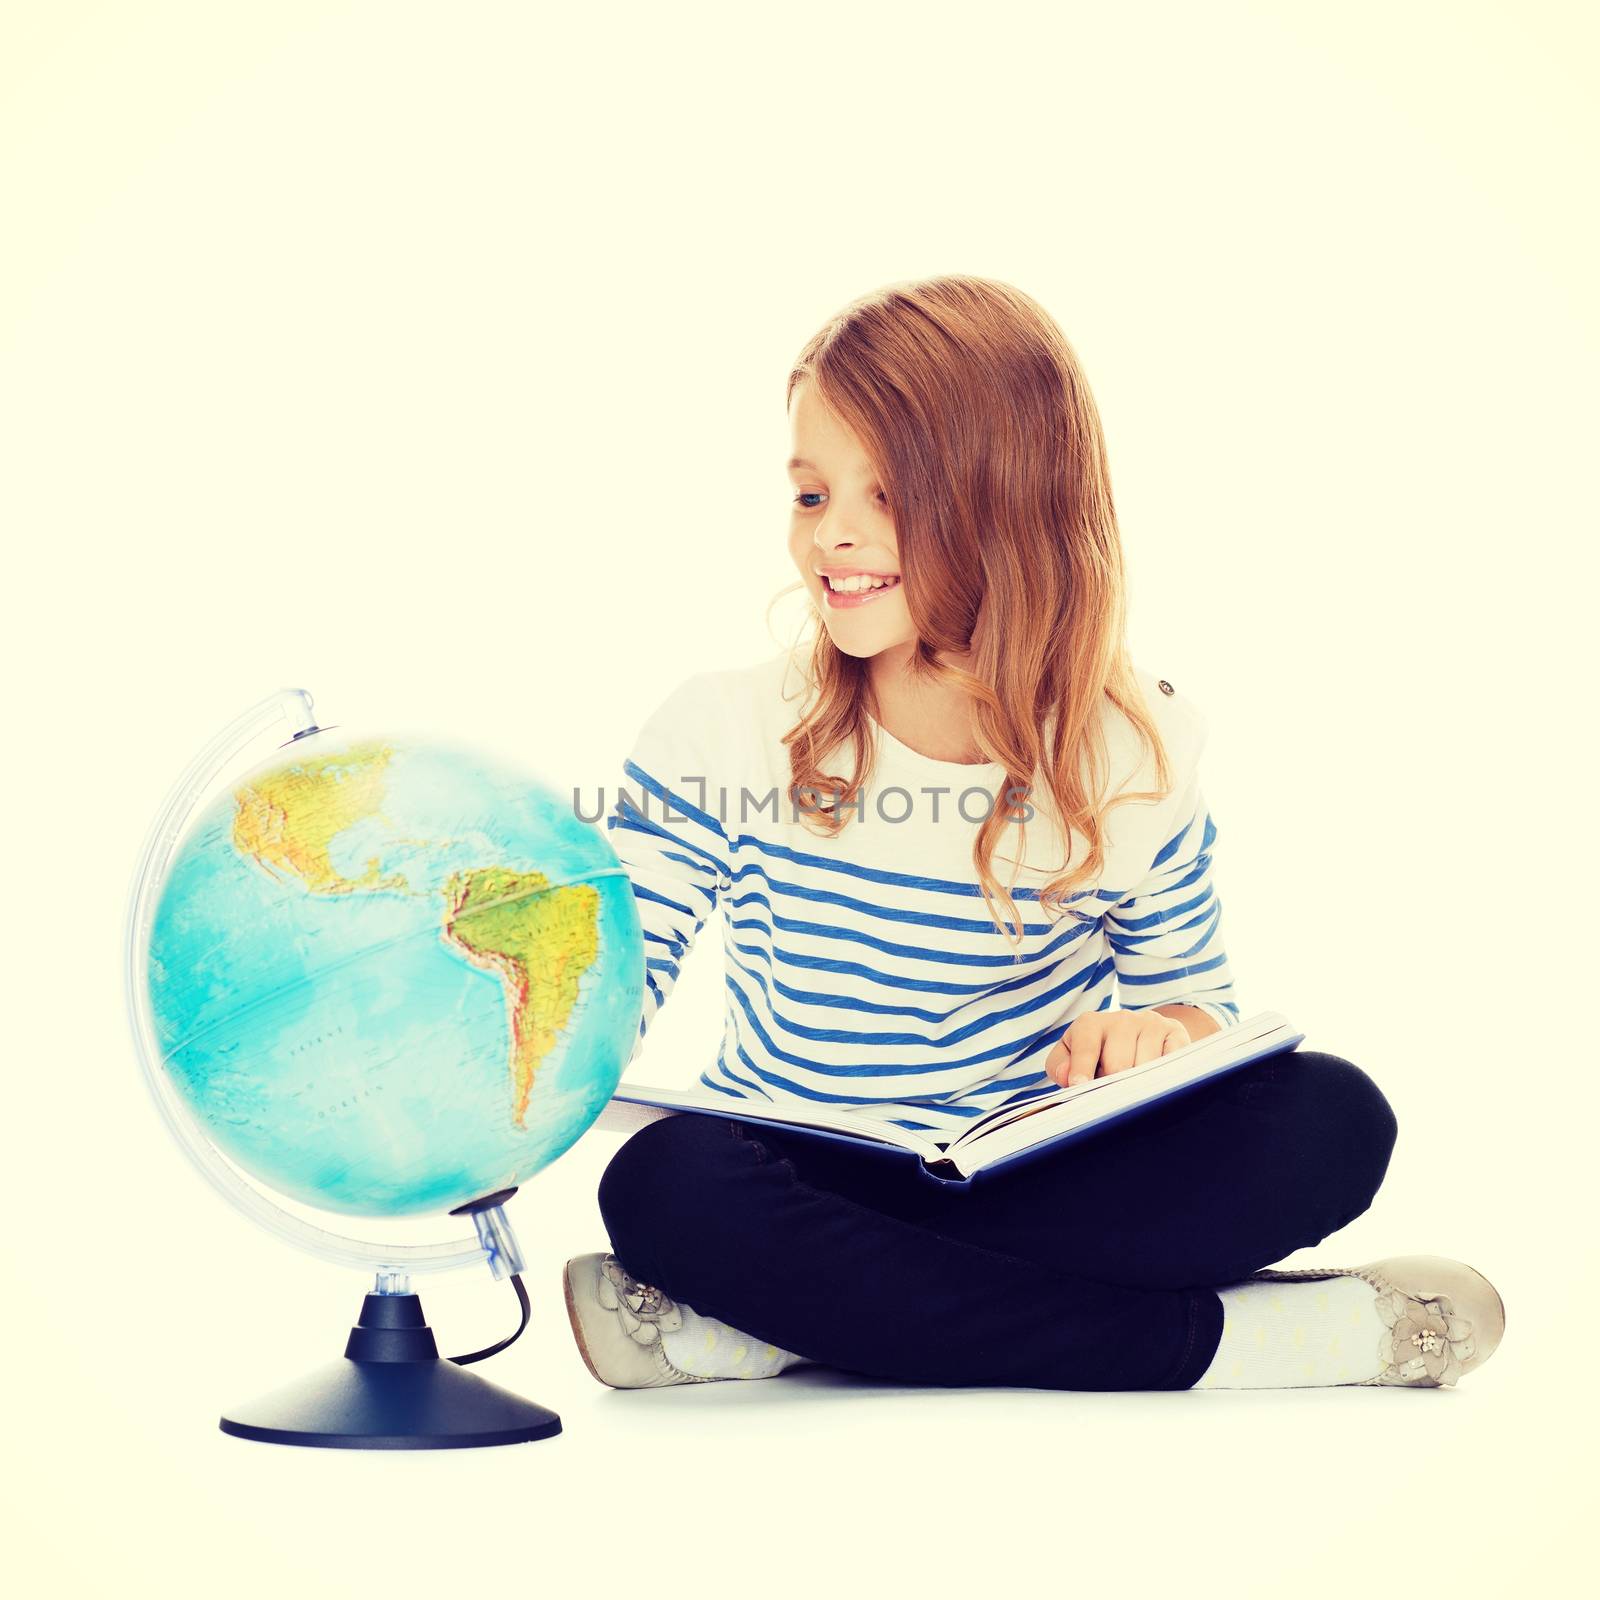 education and school concept - little student girl looking at globe and holding book